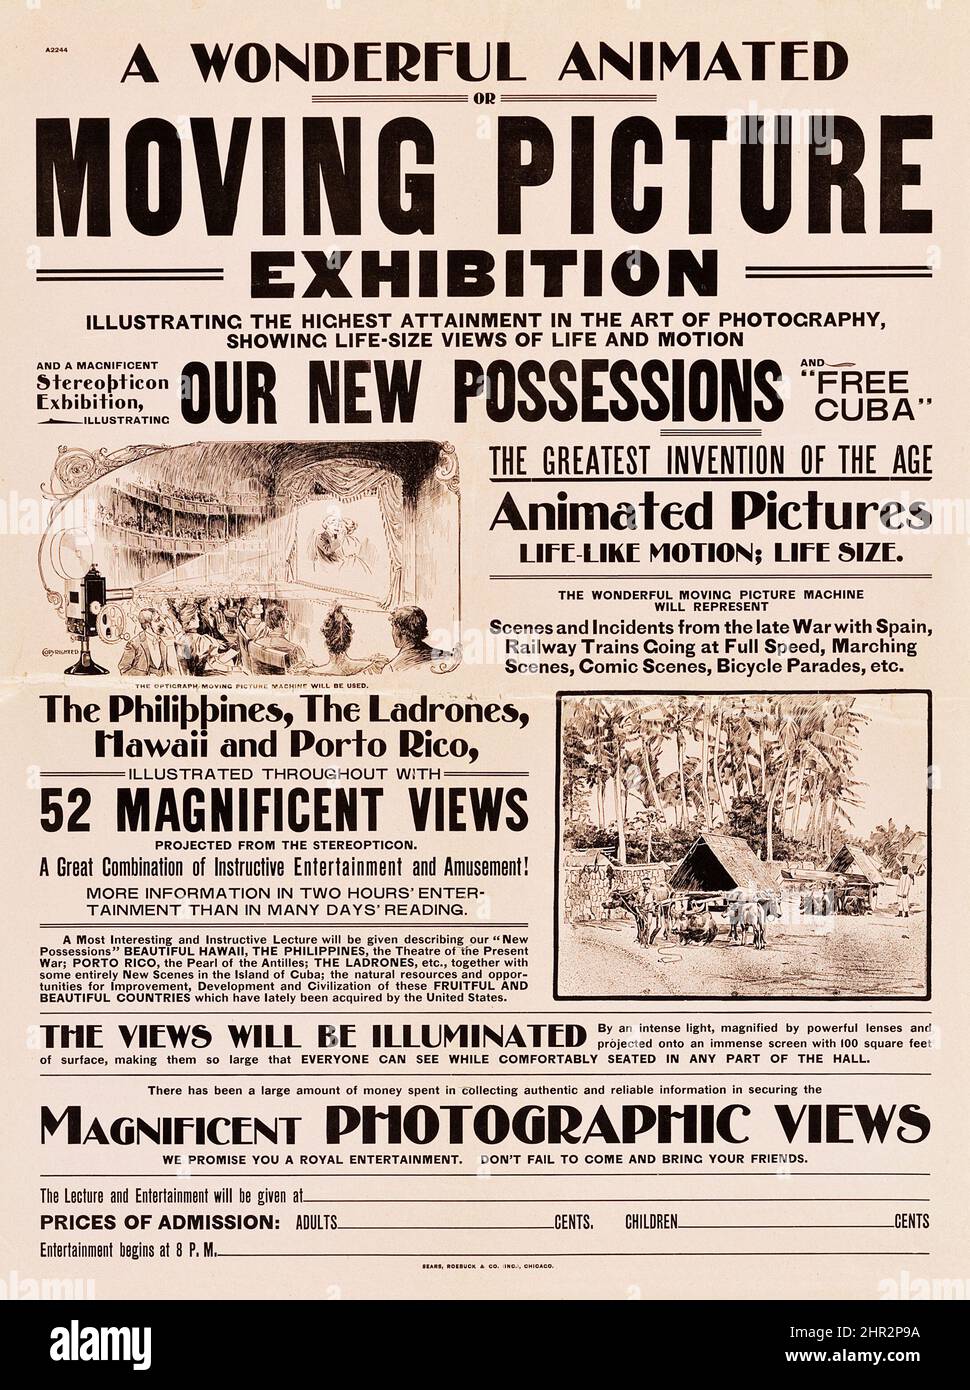 Sears Roebuck Film Exhibition Poster (Um 1900-1908) Moving Picture Exhibition. Stockfoto